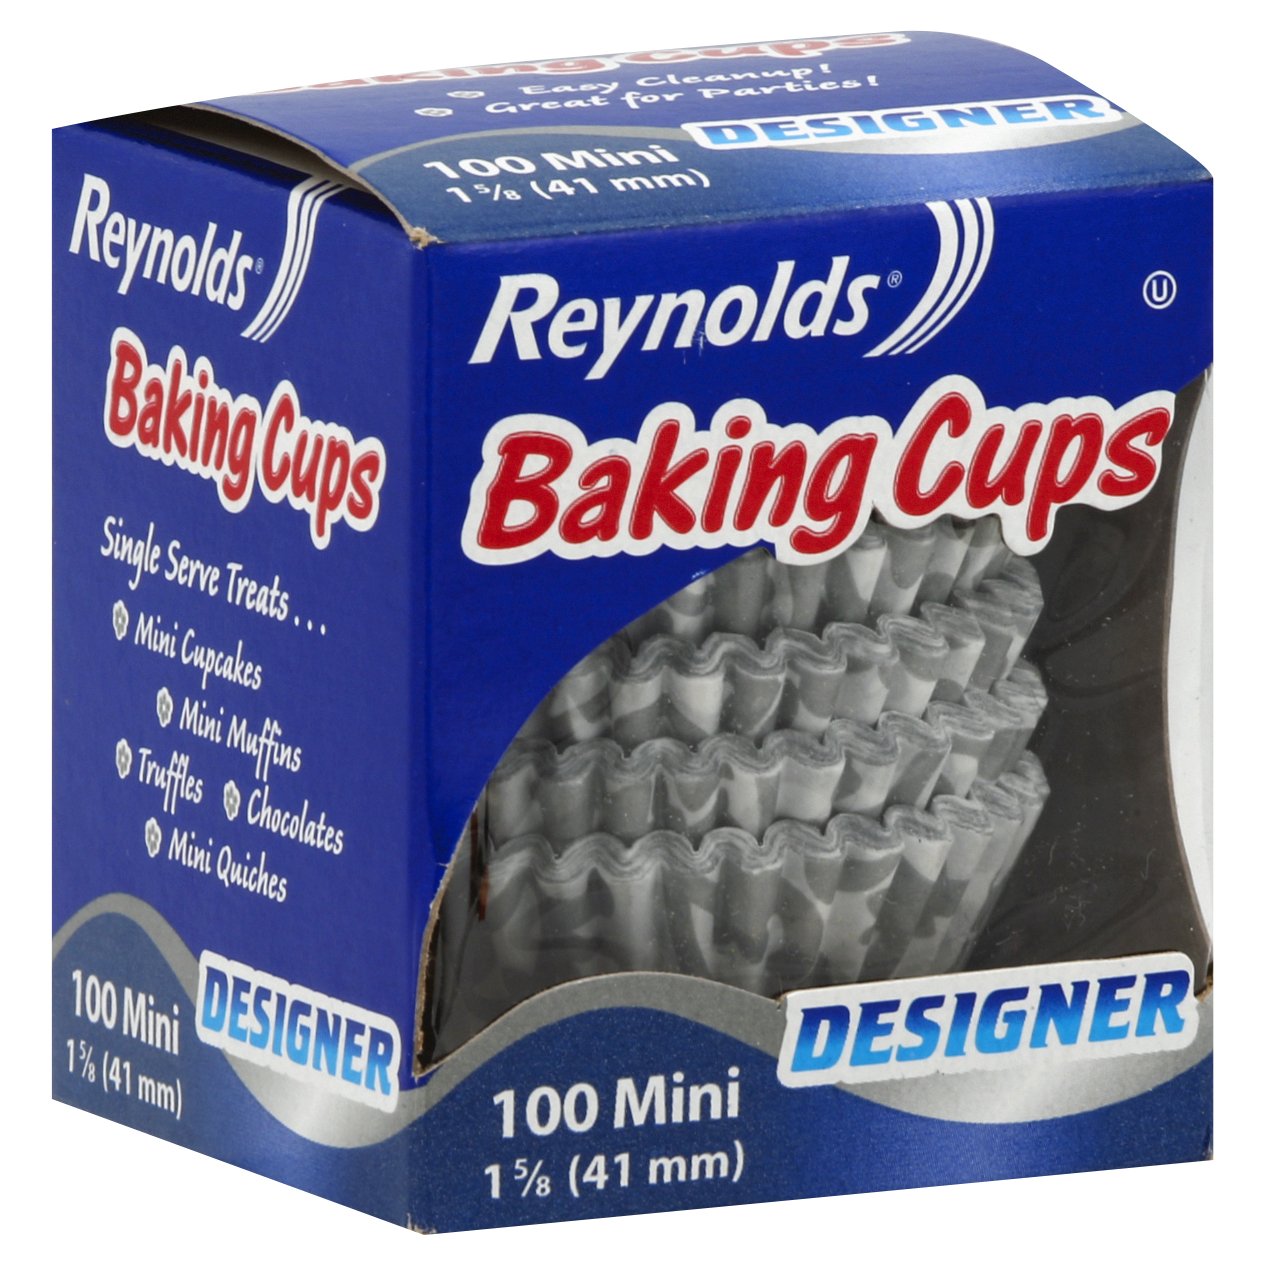 NEW Lot 1000 + mixed size and prints Reynolds Baking Cups Cupcake